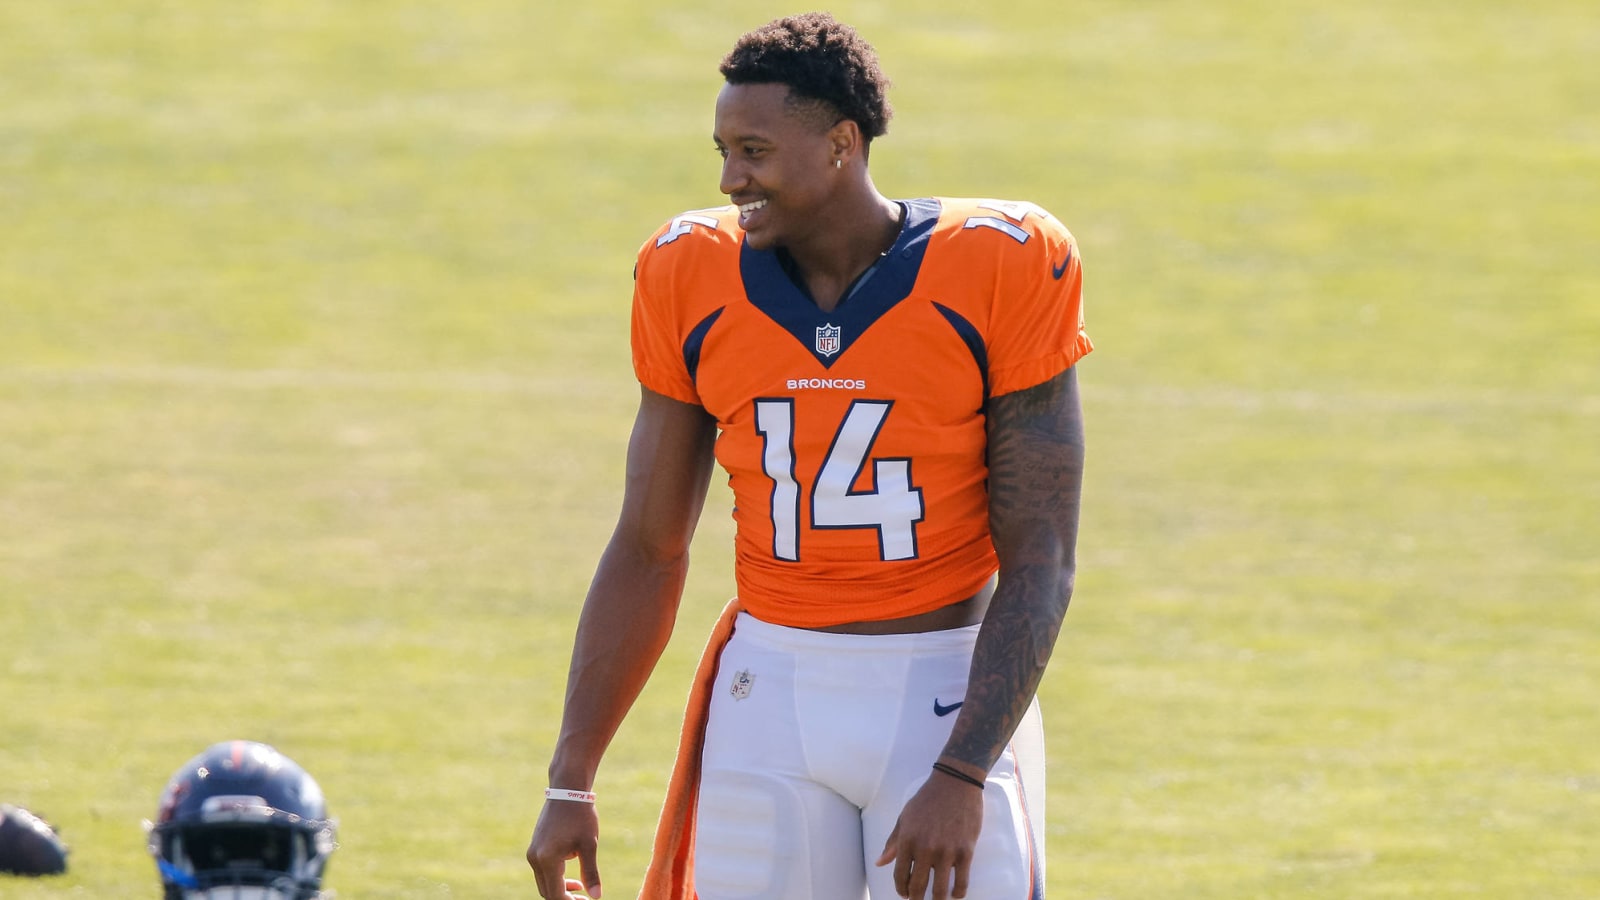 Broncos' Sutton running routes after tearing ACL in fall